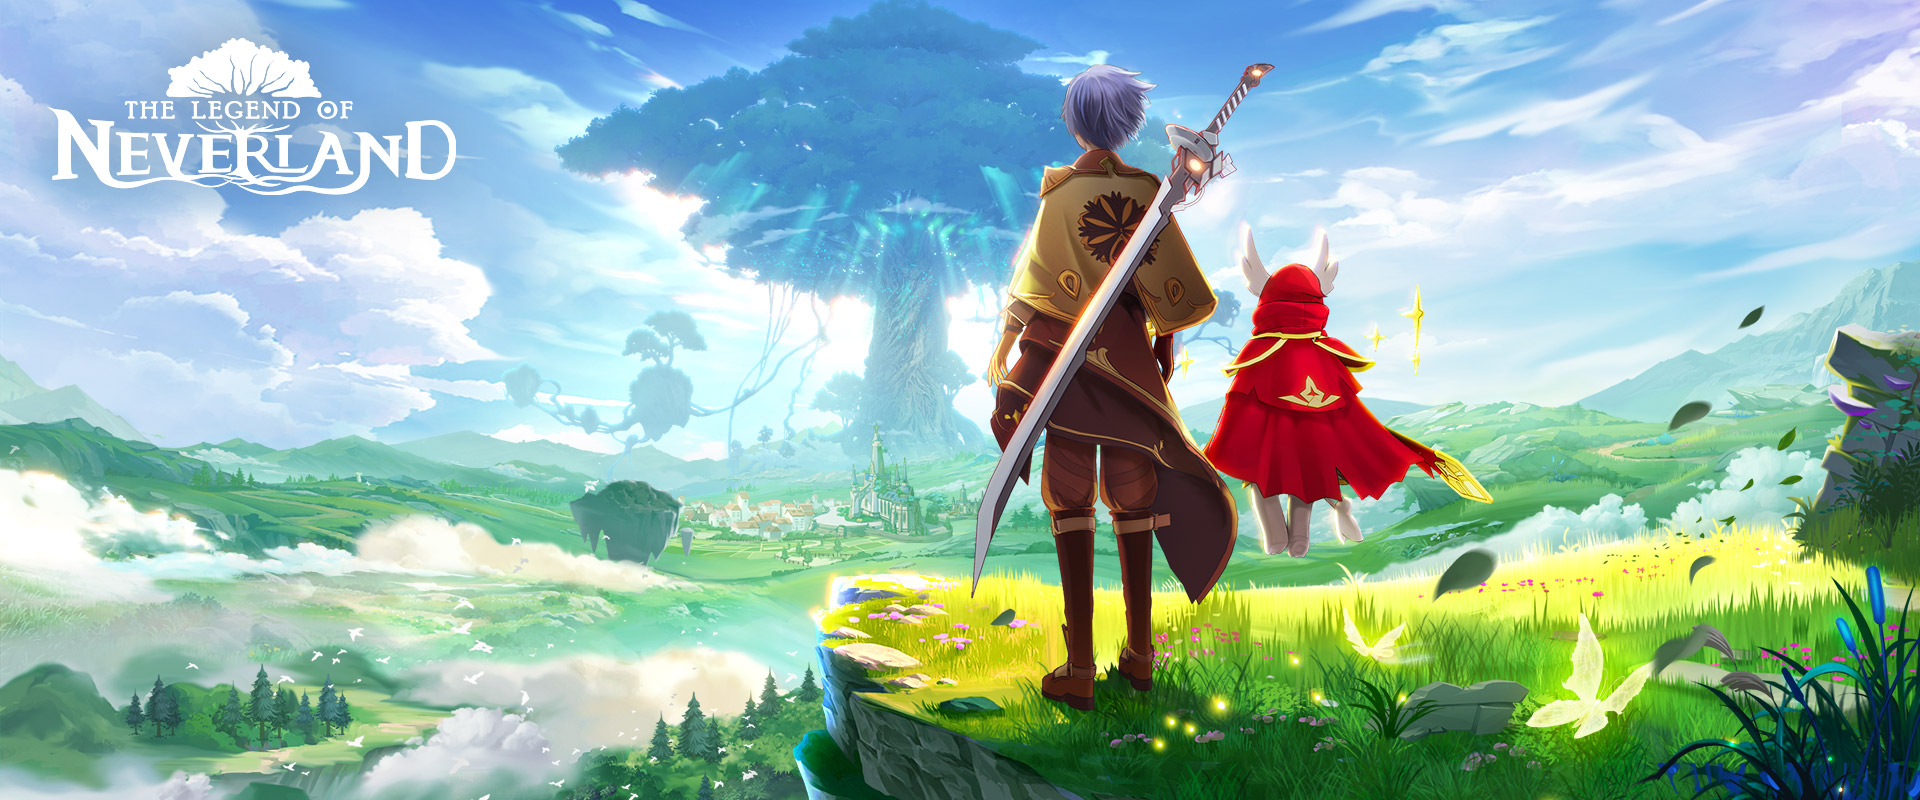 Download & Play The Legend of Neverland (Global) on PC & Mac with NoxPlayer (Emulator)